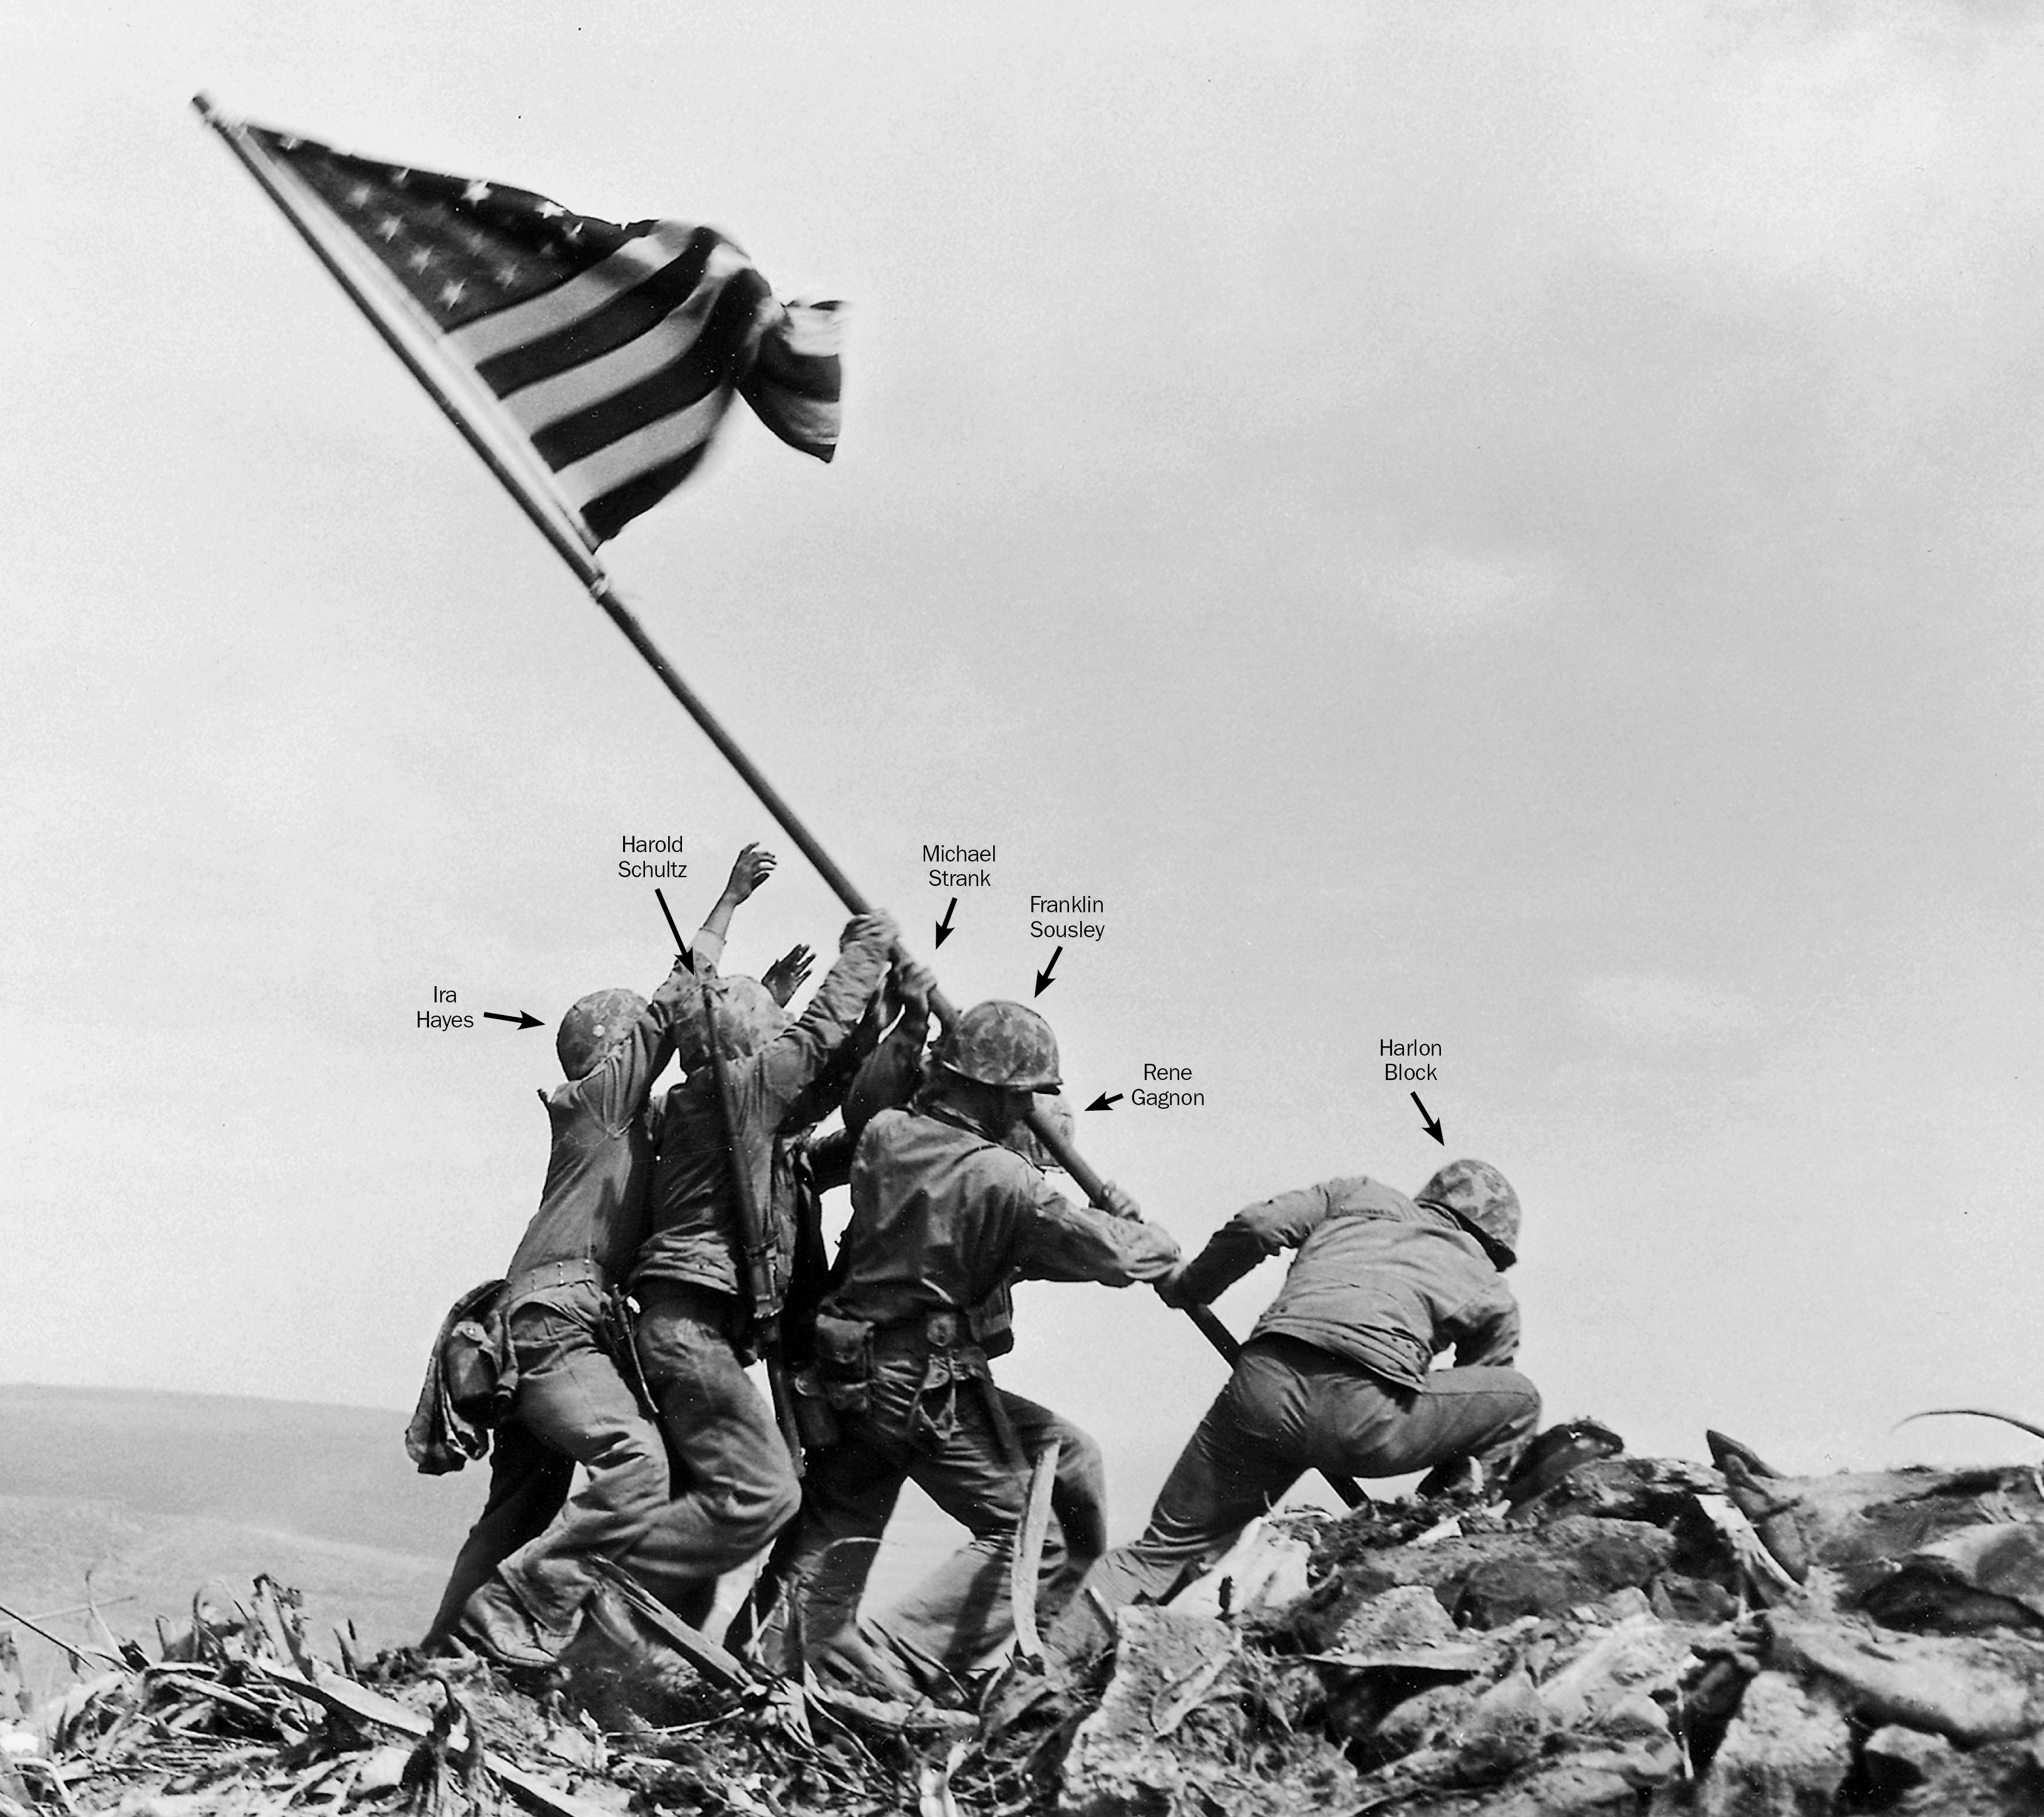 LTCOL CHARLIE NEIMEYER, USMC (RET):  how the Marine Corps Historical Division identified PFC Harold Schultz as “The Unknown Flag Raiser of Iwo Jima”